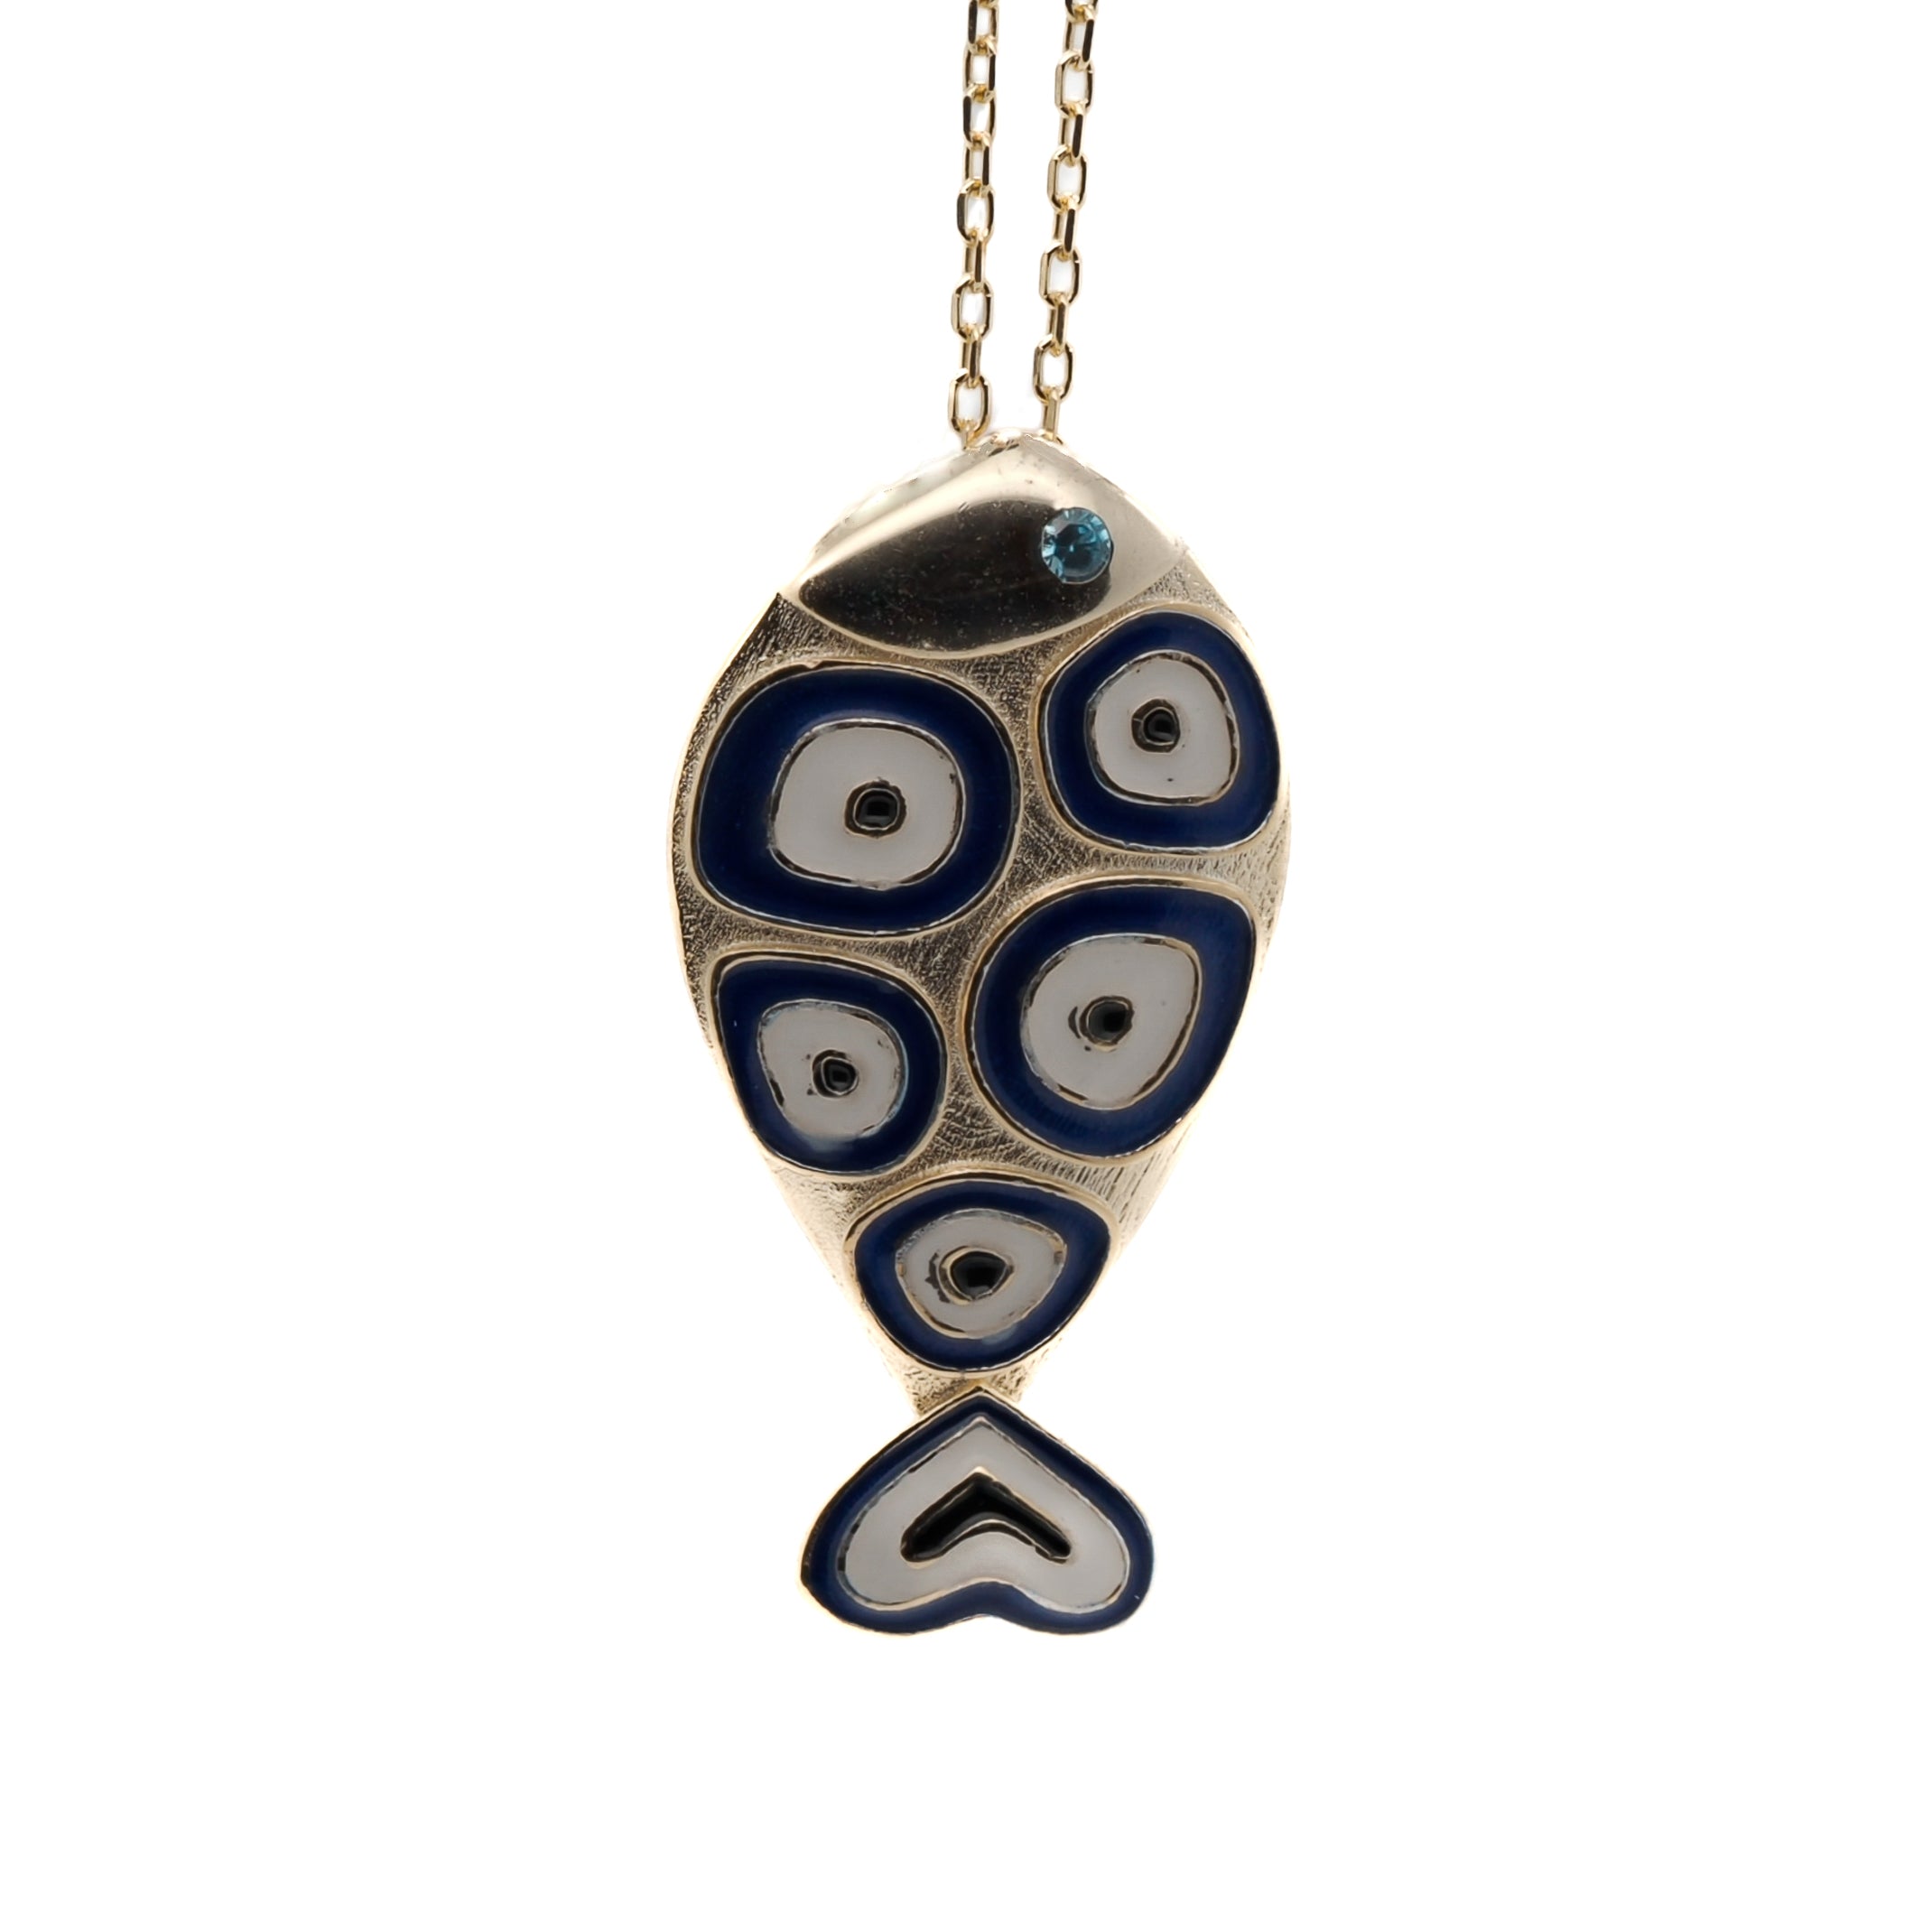 Gold and Blue Evil Eye Fish Necklace - Handcrafted necklace featuring a 925 Sterling silver pendant with blue enamel, surrounded by intricate evil eye designs for protection and good luck.